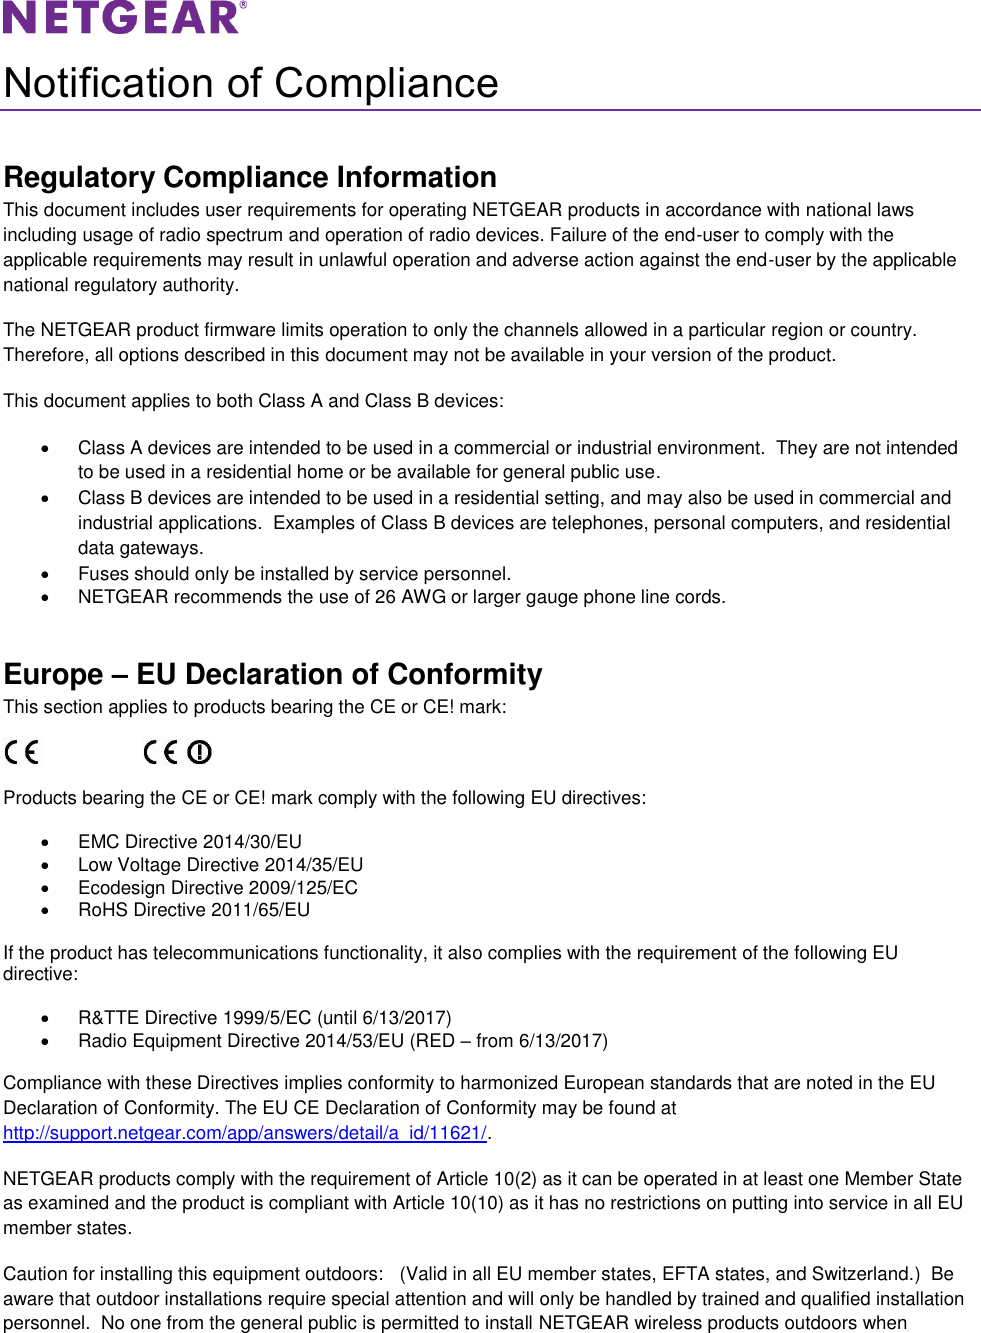   Notification of Compliance Regulatory Compliance Information This document includes user requirements for operating NETGEAR products in accordance with national laws including usage of radio spectrum and operation of radio devices. Failure of the end-user to comply with the applicable requirements may result in unlawful operation and adverse action against the end-user by the applicable national regulatory authority. The NETGEAR product firmware limits operation to only the channels allowed in a particular region or country. Therefore, all options described in this document may not be available in your version of the product. This document applies to both Class A and Class B devices:   Class A devices are intended to be used in a commercial or industrial environment.  They are not intended to be used in a residential home or be available for general public use.   Class B devices are intended to be used in a residential setting, and may also be used in commercial and industrial applications.  Examples of Class B devices are telephones, personal computers, and residential data gateways.   Fuses should only be installed by service personnel.   NETGEAR recommends the use of 26 AWG or larger gauge phone line cords. Europe – EU Declaration of Conformity This section applies to products bearing the CE or CE! mark:                      Products bearing the CE or CE! mark comply with the following EU directives:   EMC Directive 2014/30/EU   Low Voltage Directive 2014/35/EU   Ecodesign Directive 2009/125/EC   RoHS Directive 2011/65/EU If the product has telecommunications functionality, it also complies with the requirement of the following EU directive:   R&amp;TTE Directive 1999/5/EC (until 6/13/2017)   Radio Equipment Directive 2014/53/EU (RED – from 6/13/2017) Compliance with these Directives implies conformity to harmonized European standards that are noted in the EU Declaration of Conformity. The EU CE Declaration of Conformity may be found at http://support.netgear.com/app/answers/detail/a_id/11621/. NETGEAR products comply with the requirement of Article 10(2) as it can be operated in at least one Member State as examined and the product is compliant with Article 10(10) as it has no restrictions on putting into service in all EU member states. Caution for installing this equipment outdoors:   (Valid in all EU member states, EFTA states, and Switzerland.)  Be aware that outdoor installations require special attention and will only be handled by trained and qualified installation personnel.  No one from the general public is permitted to install NETGEAR wireless products outdoors when 